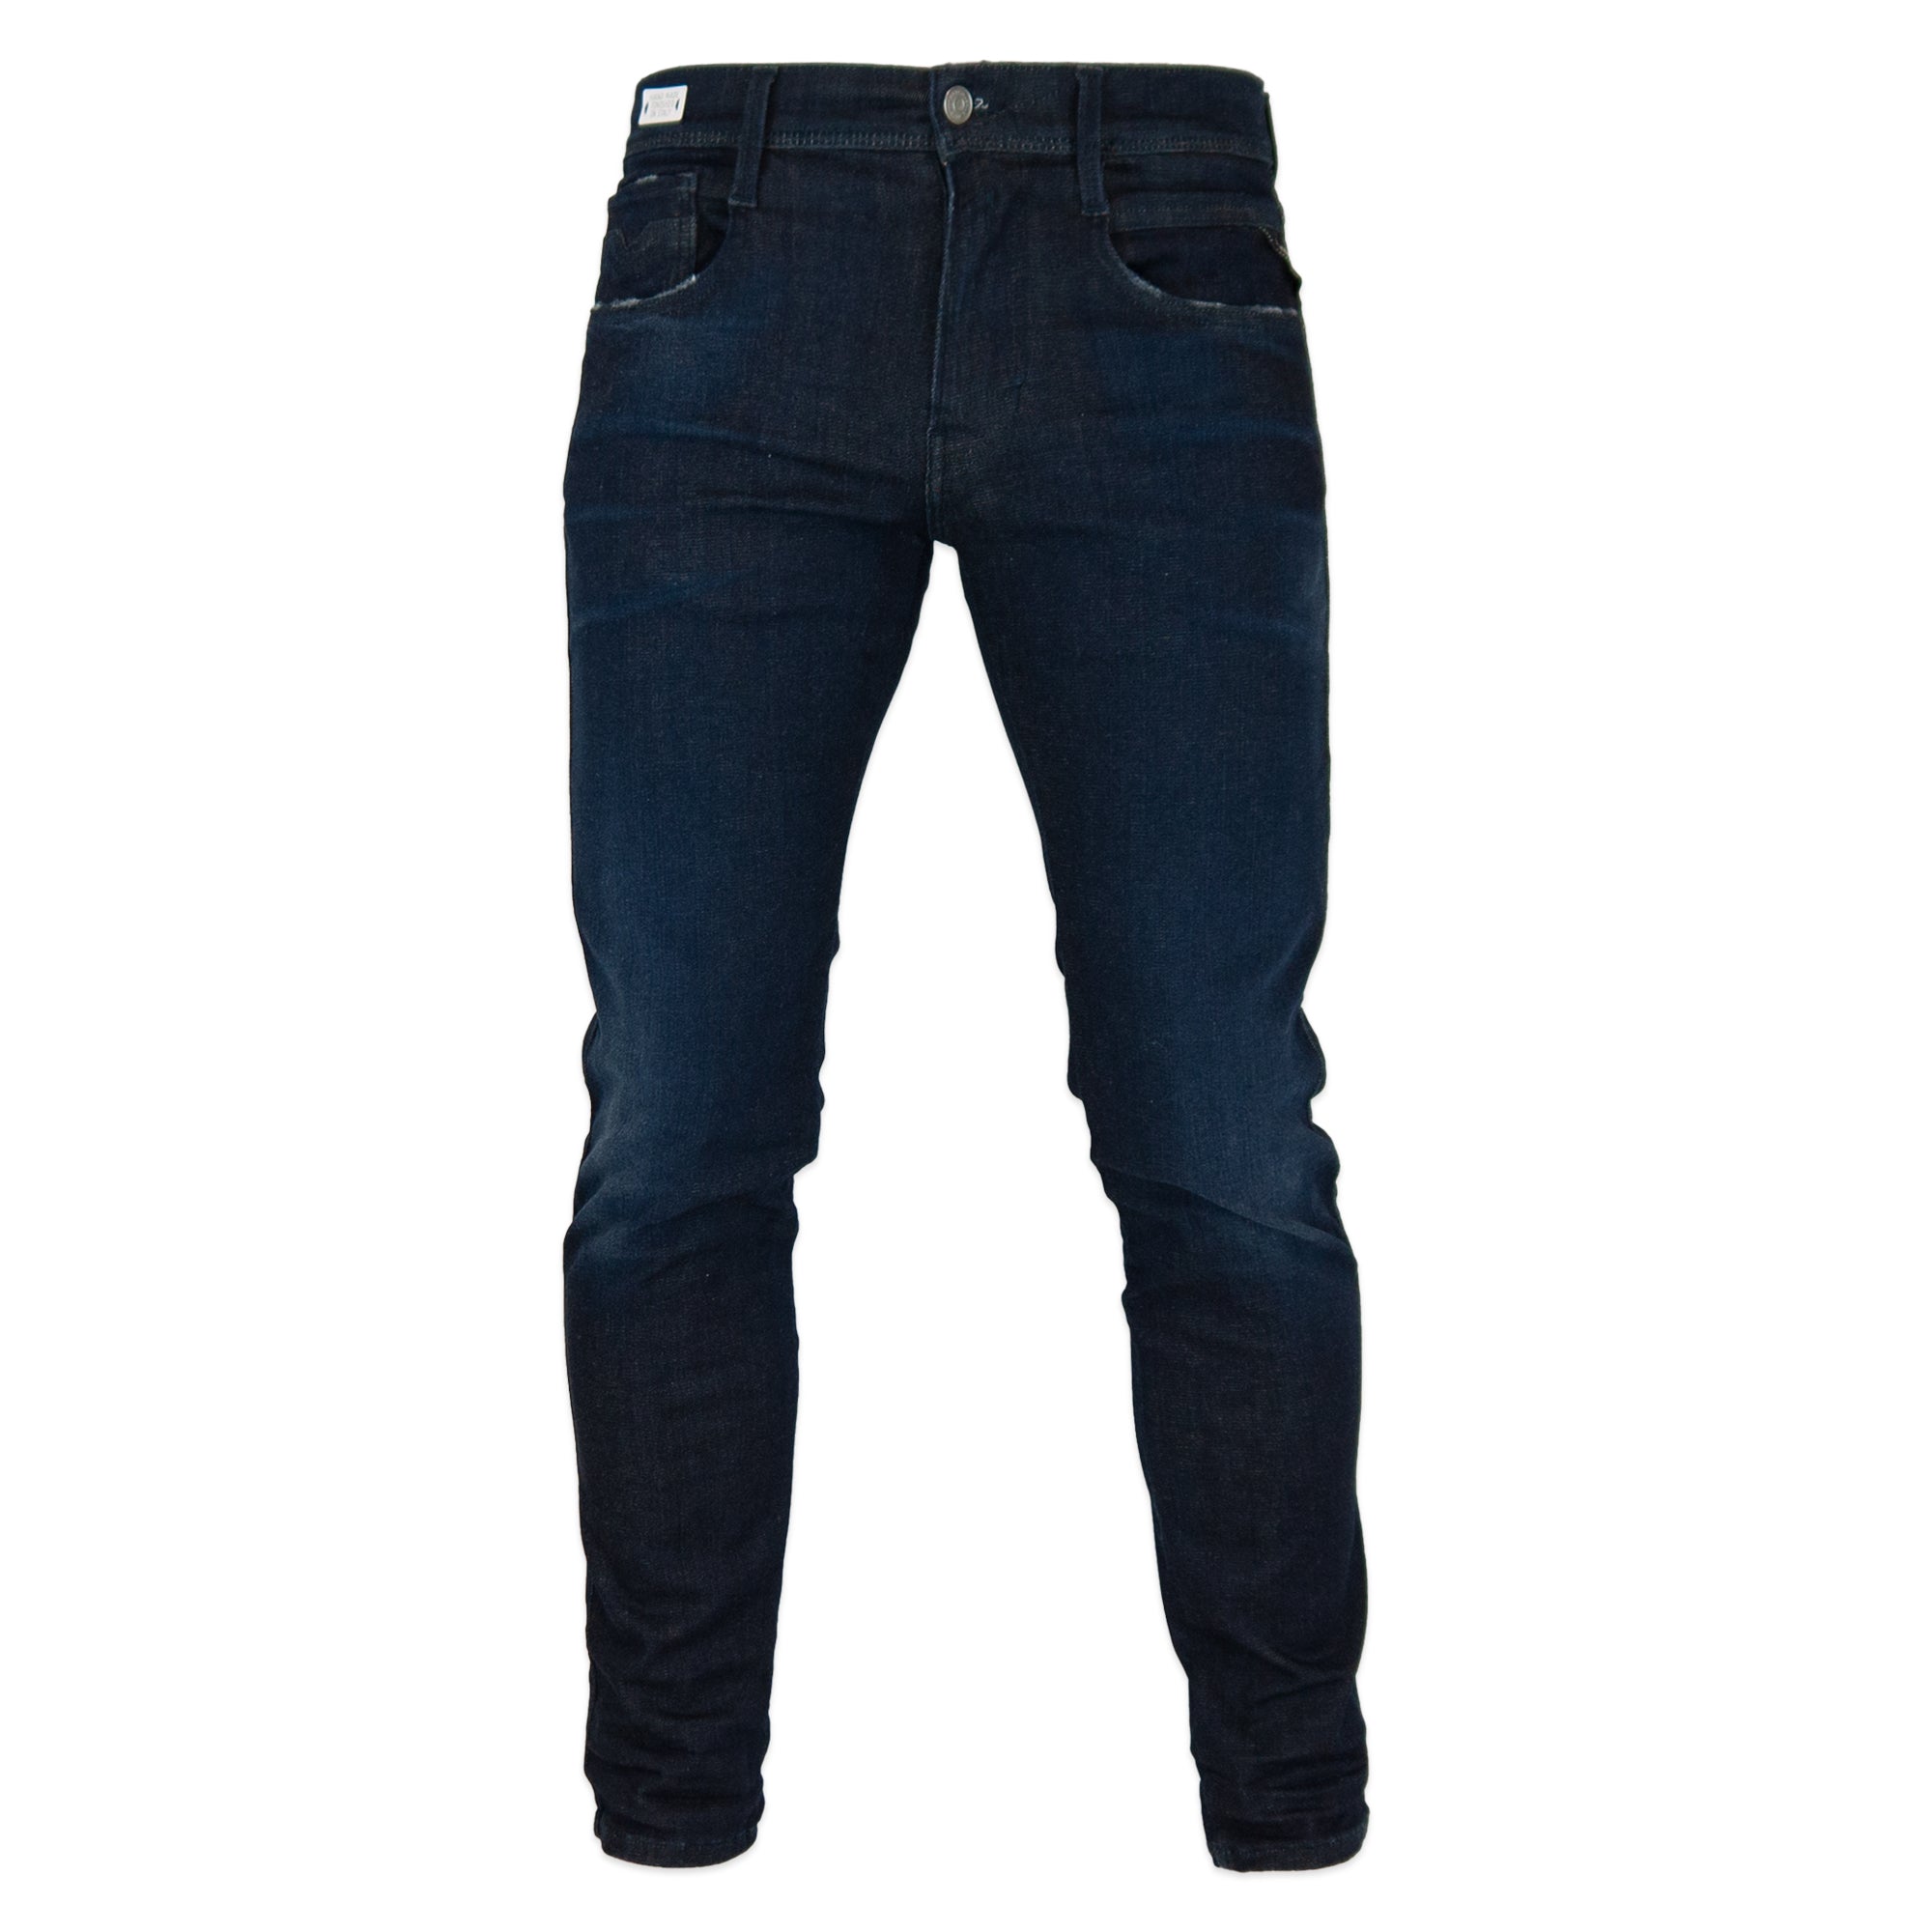 Replay Hyperflex Anbass CLOUDS Edition Slim Fit Jeans - Rinse Dark Blue